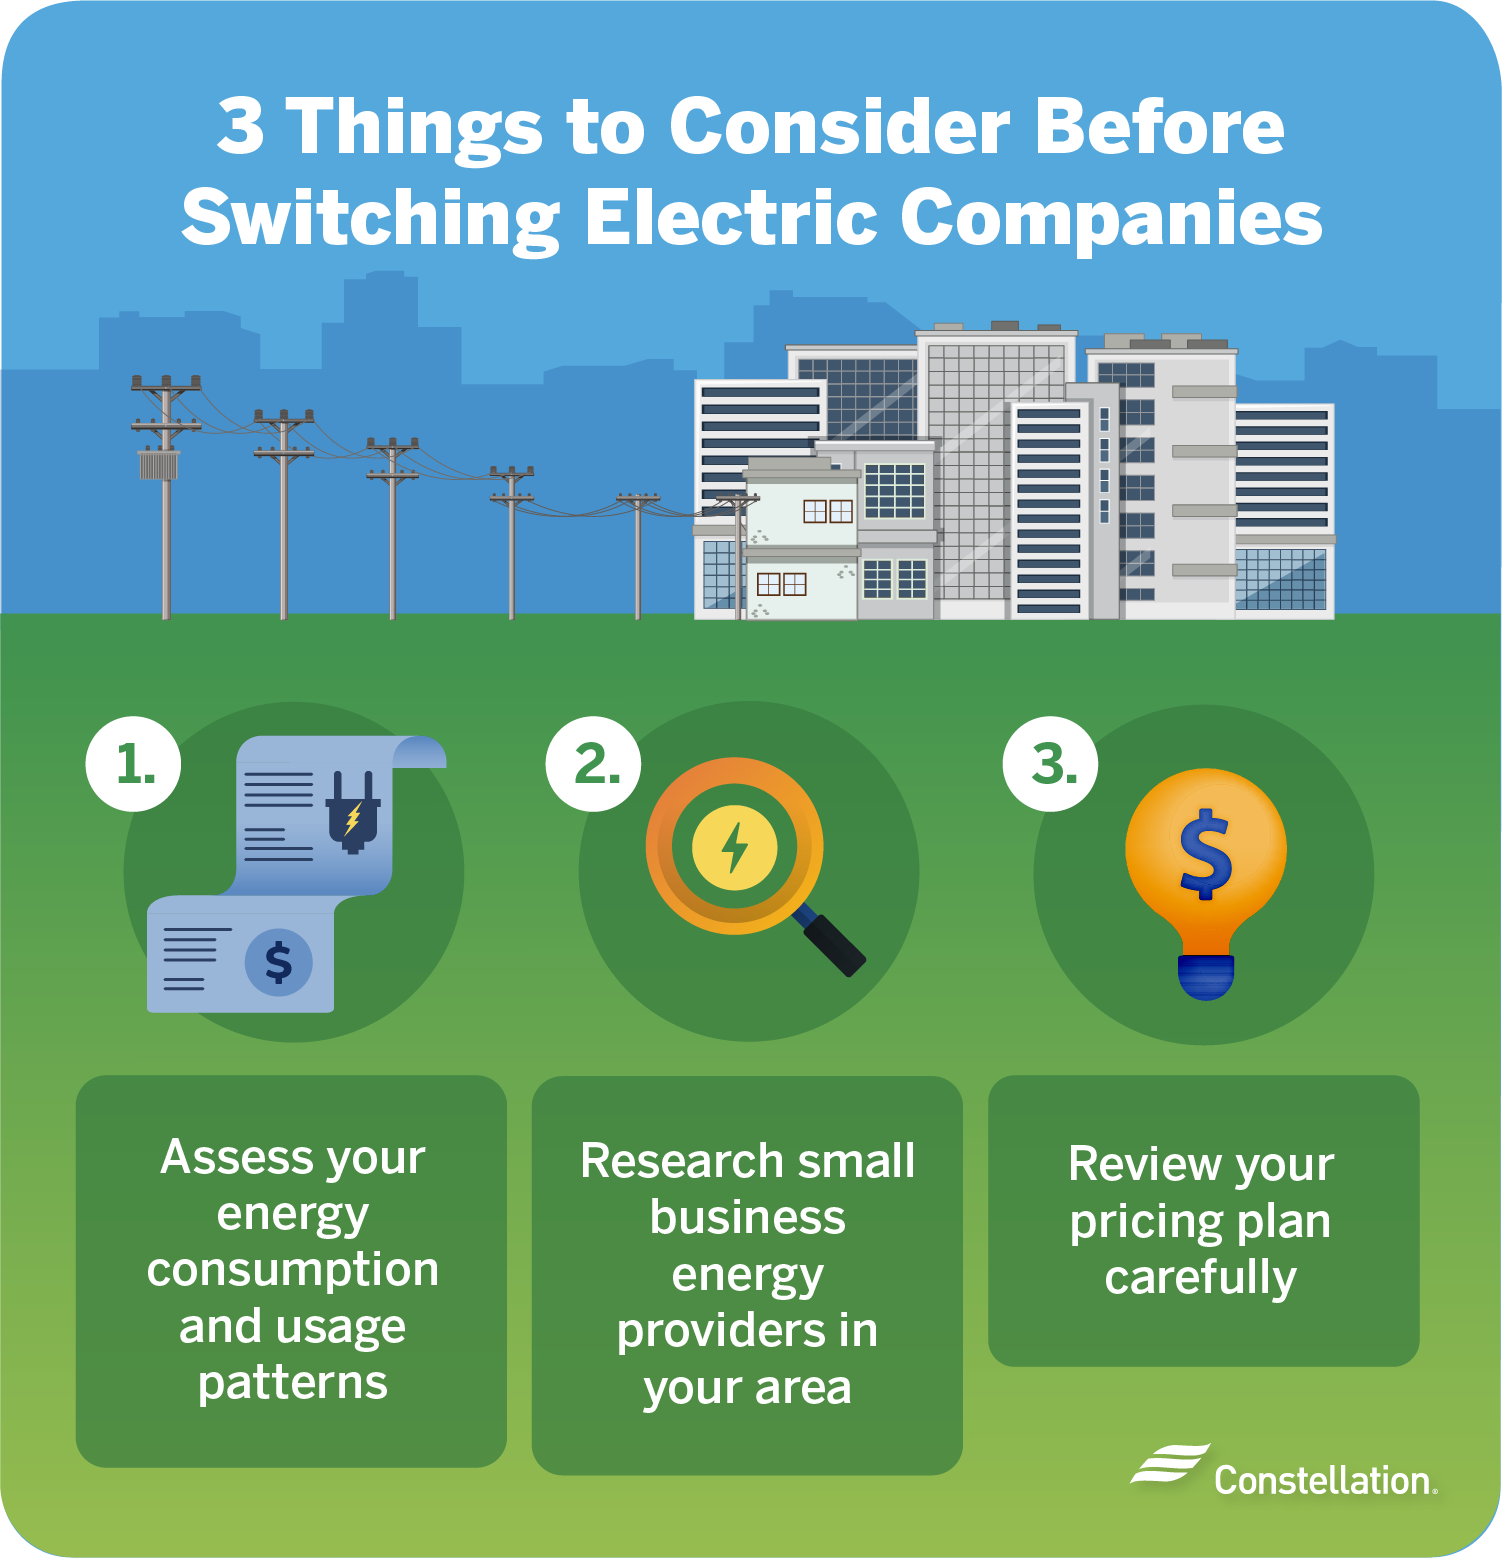 What to consider before switching electric companies.